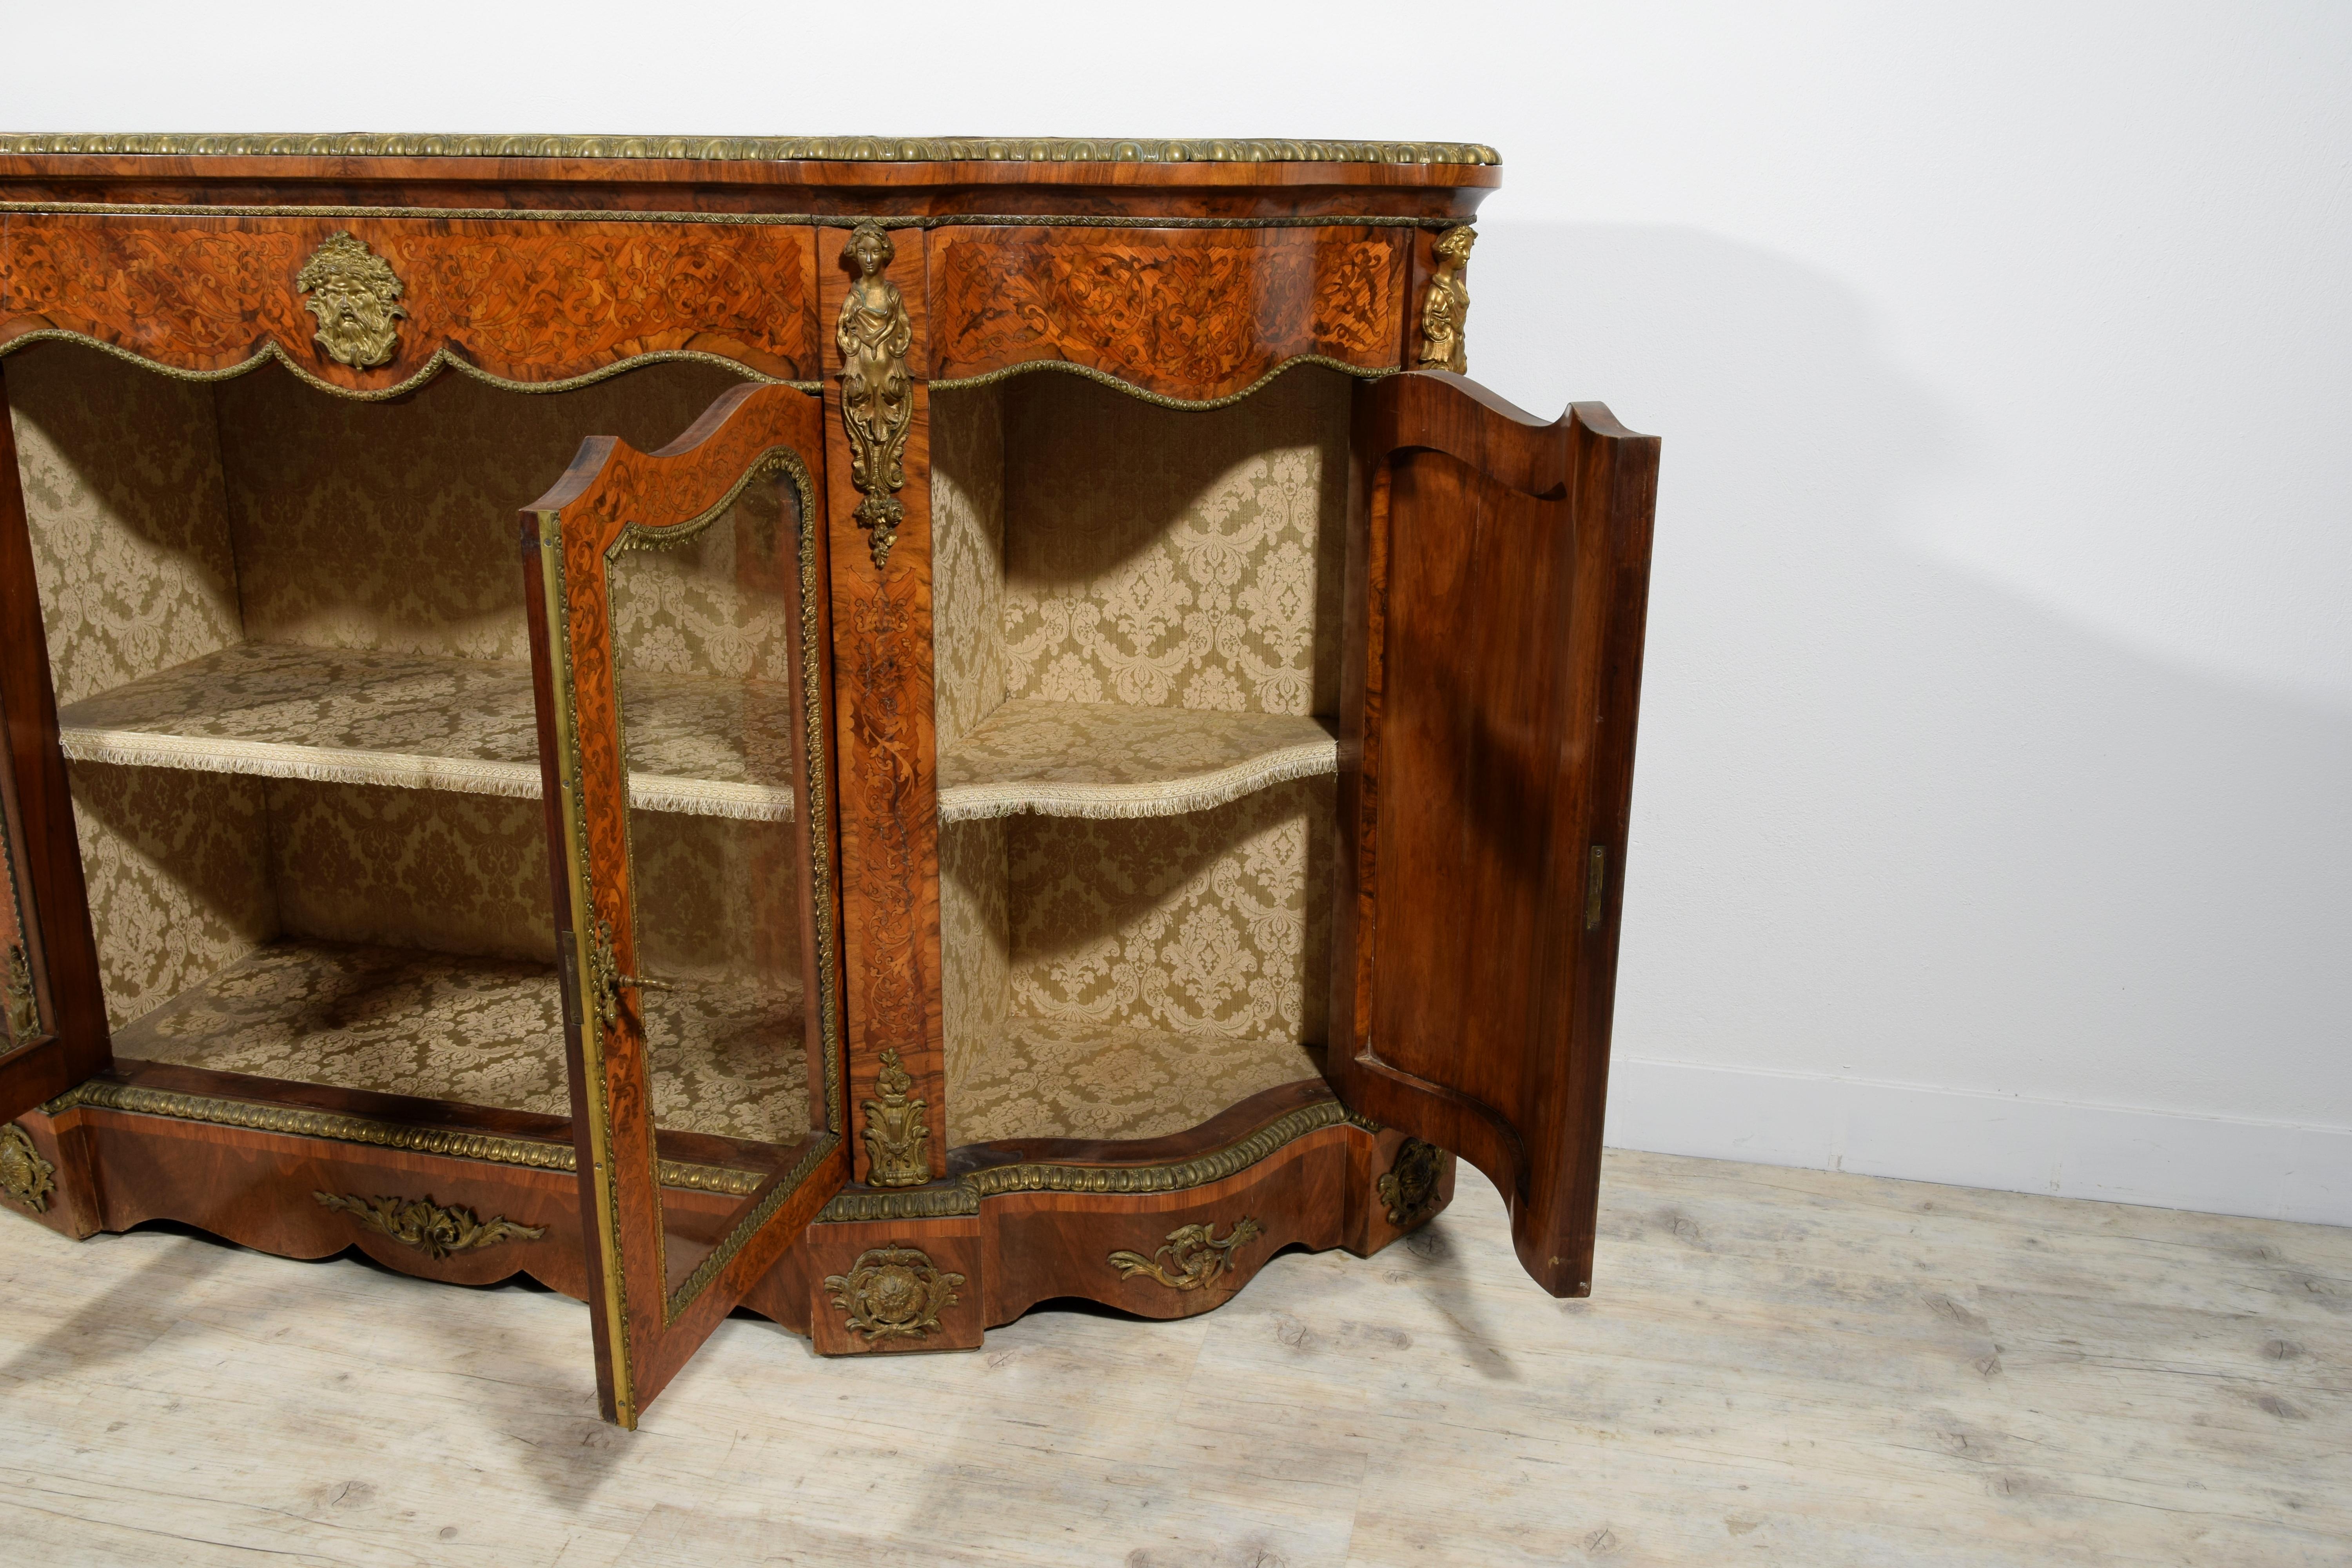 19th Century, English Inlaid Wood Sideboard with Gilt Bronzes 14